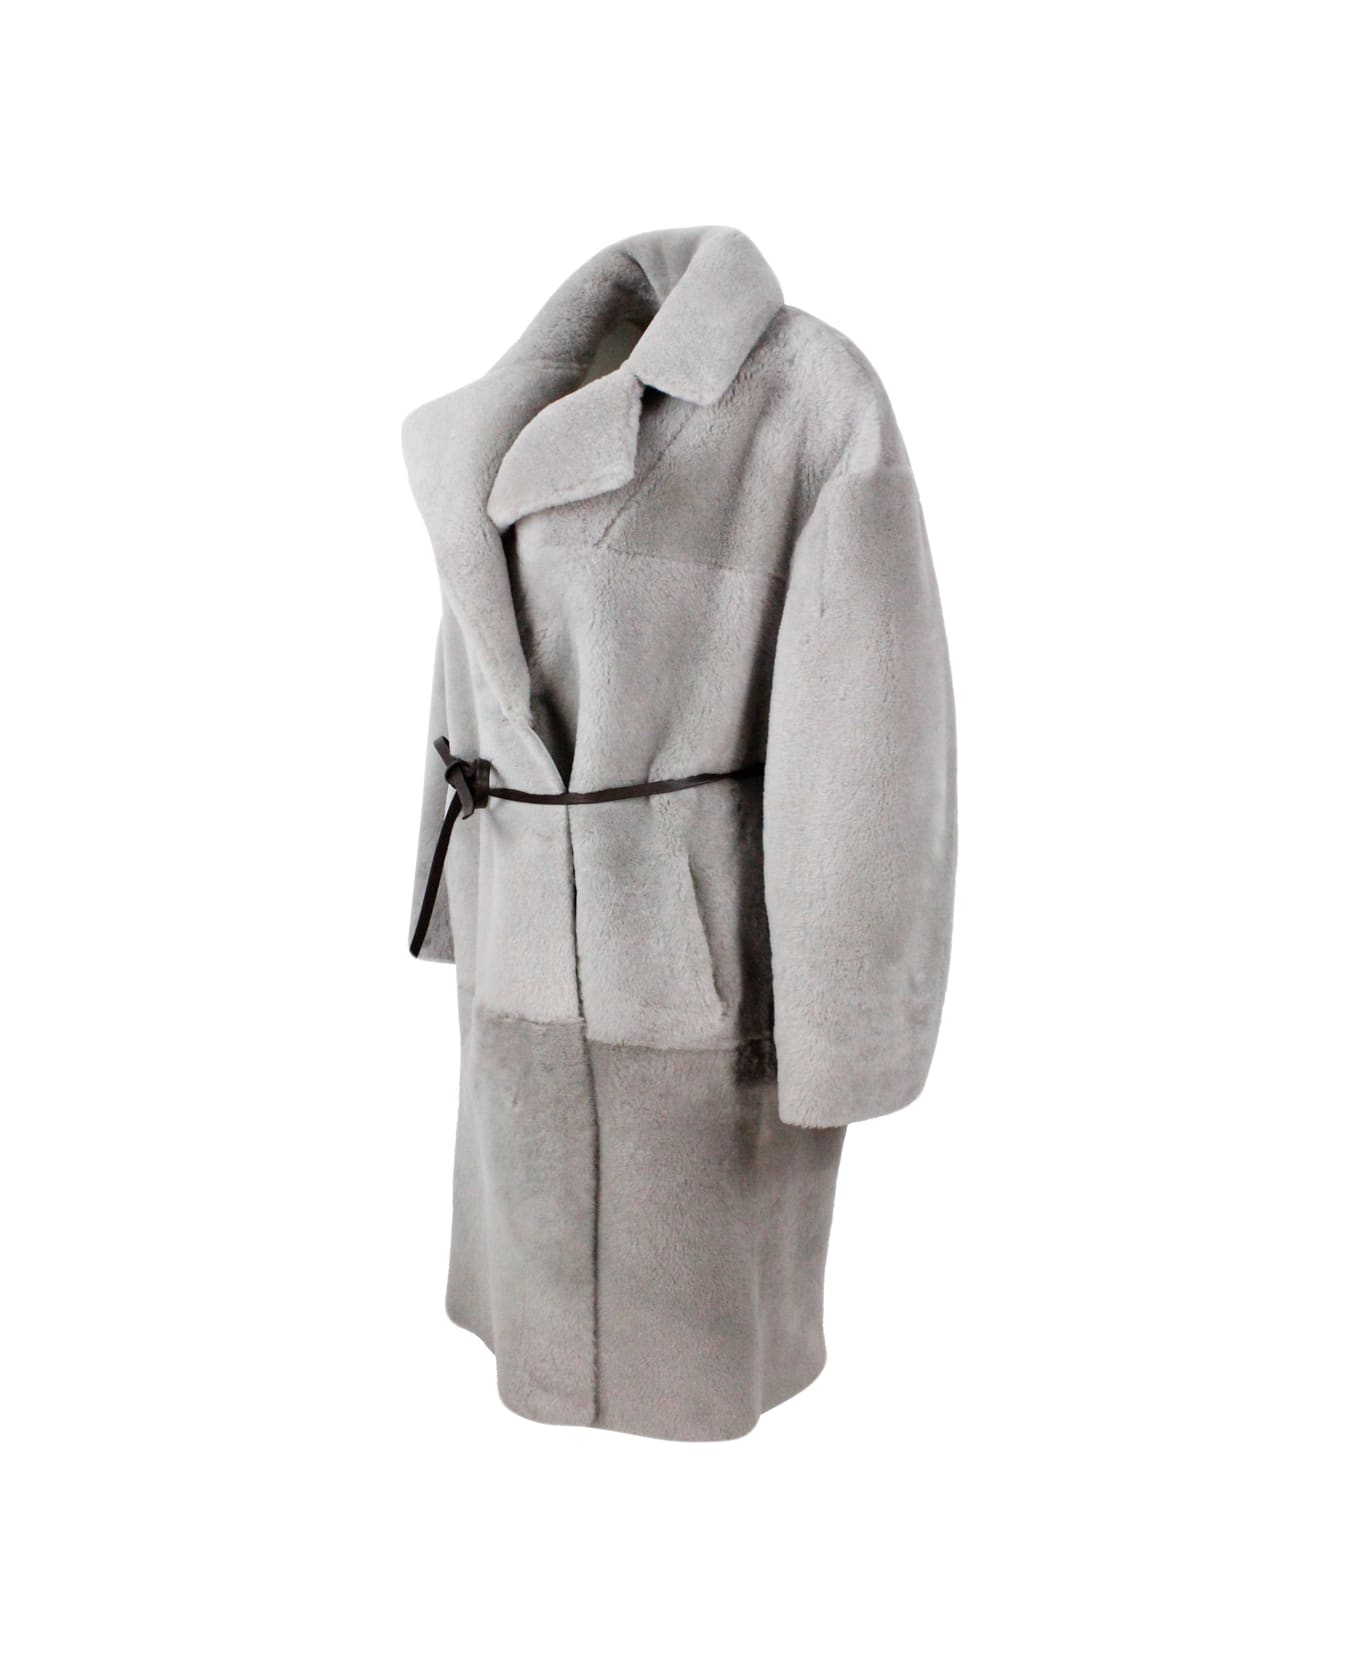 Fabiana Filippi Long Coat In Reversible Shearling Sheepskin With Belt At The Waist And One Button Closure - Nut